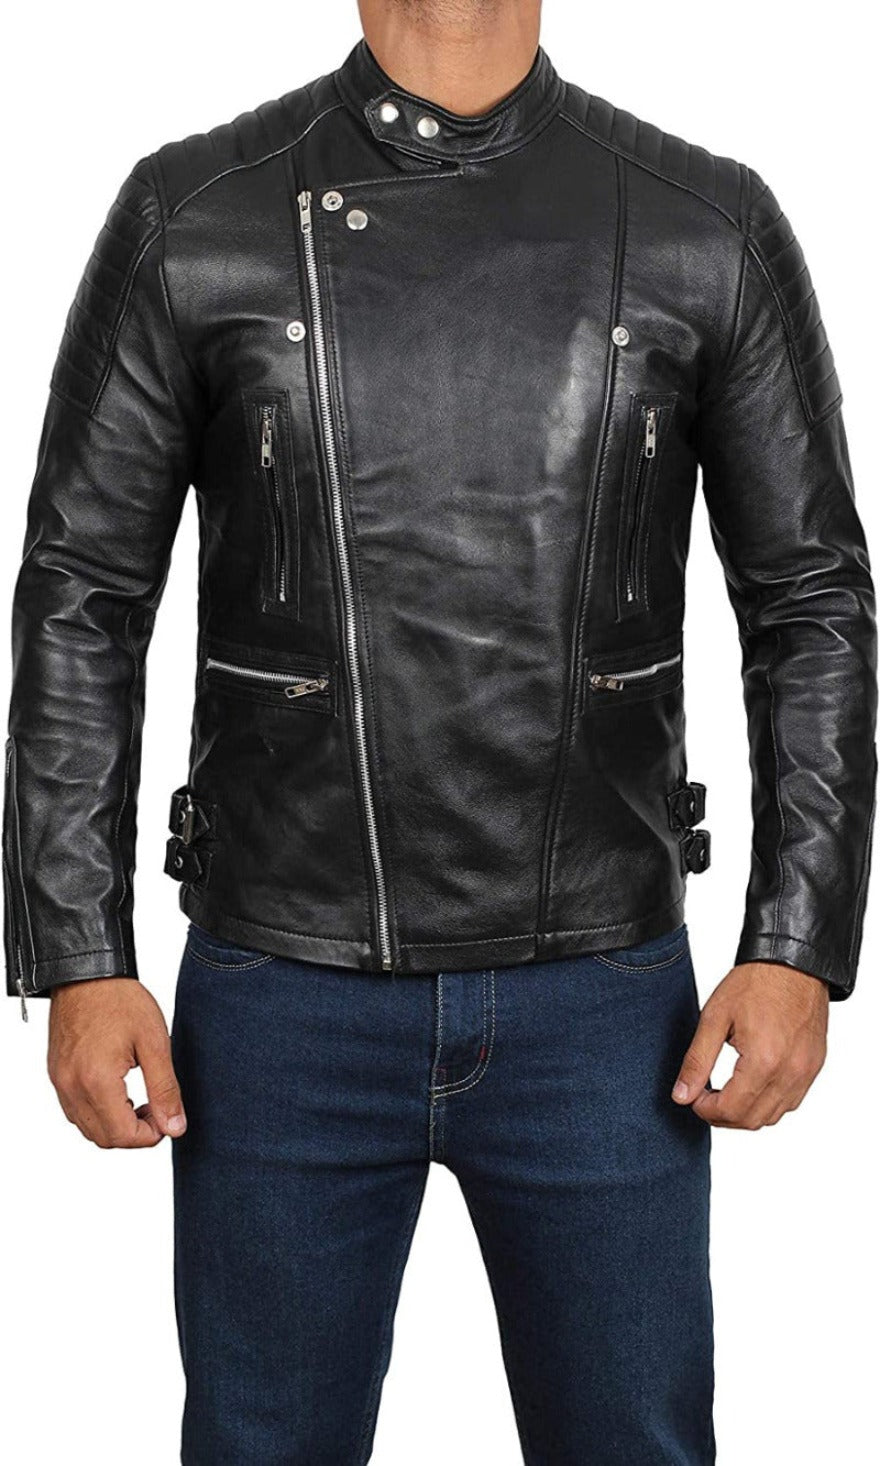 Picture of a model wearing our Mens Black Leather Moto Jacket, front view with zipper closed all the way up.